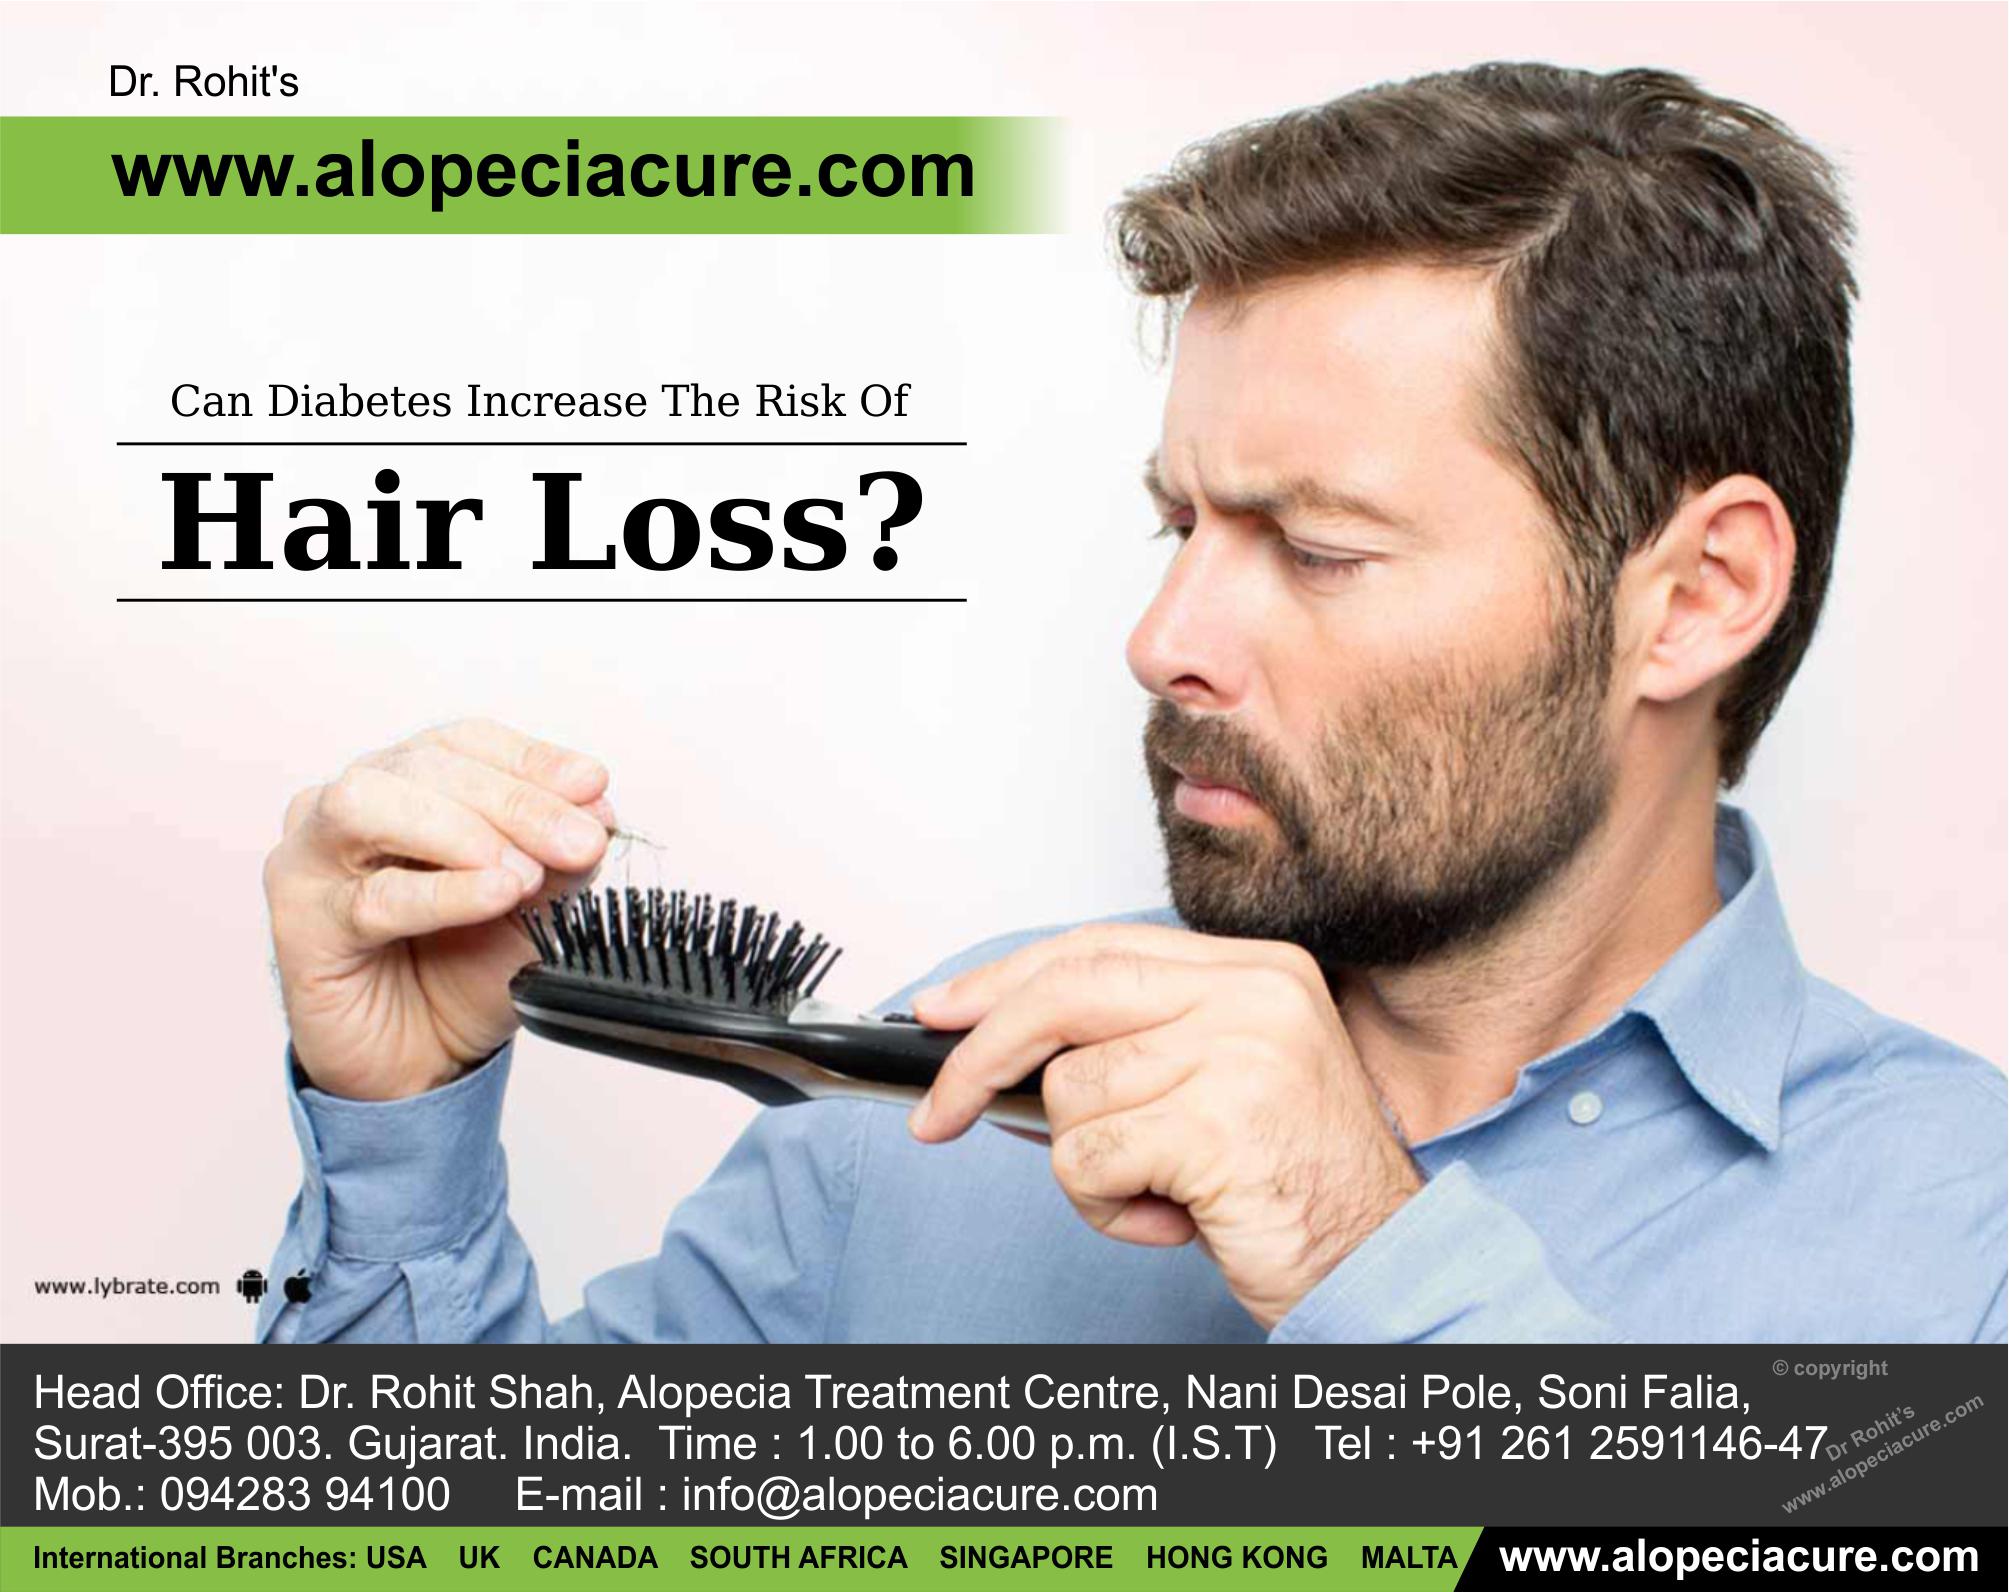 Can Diabetes Increase The Risk Of Hair Loss?